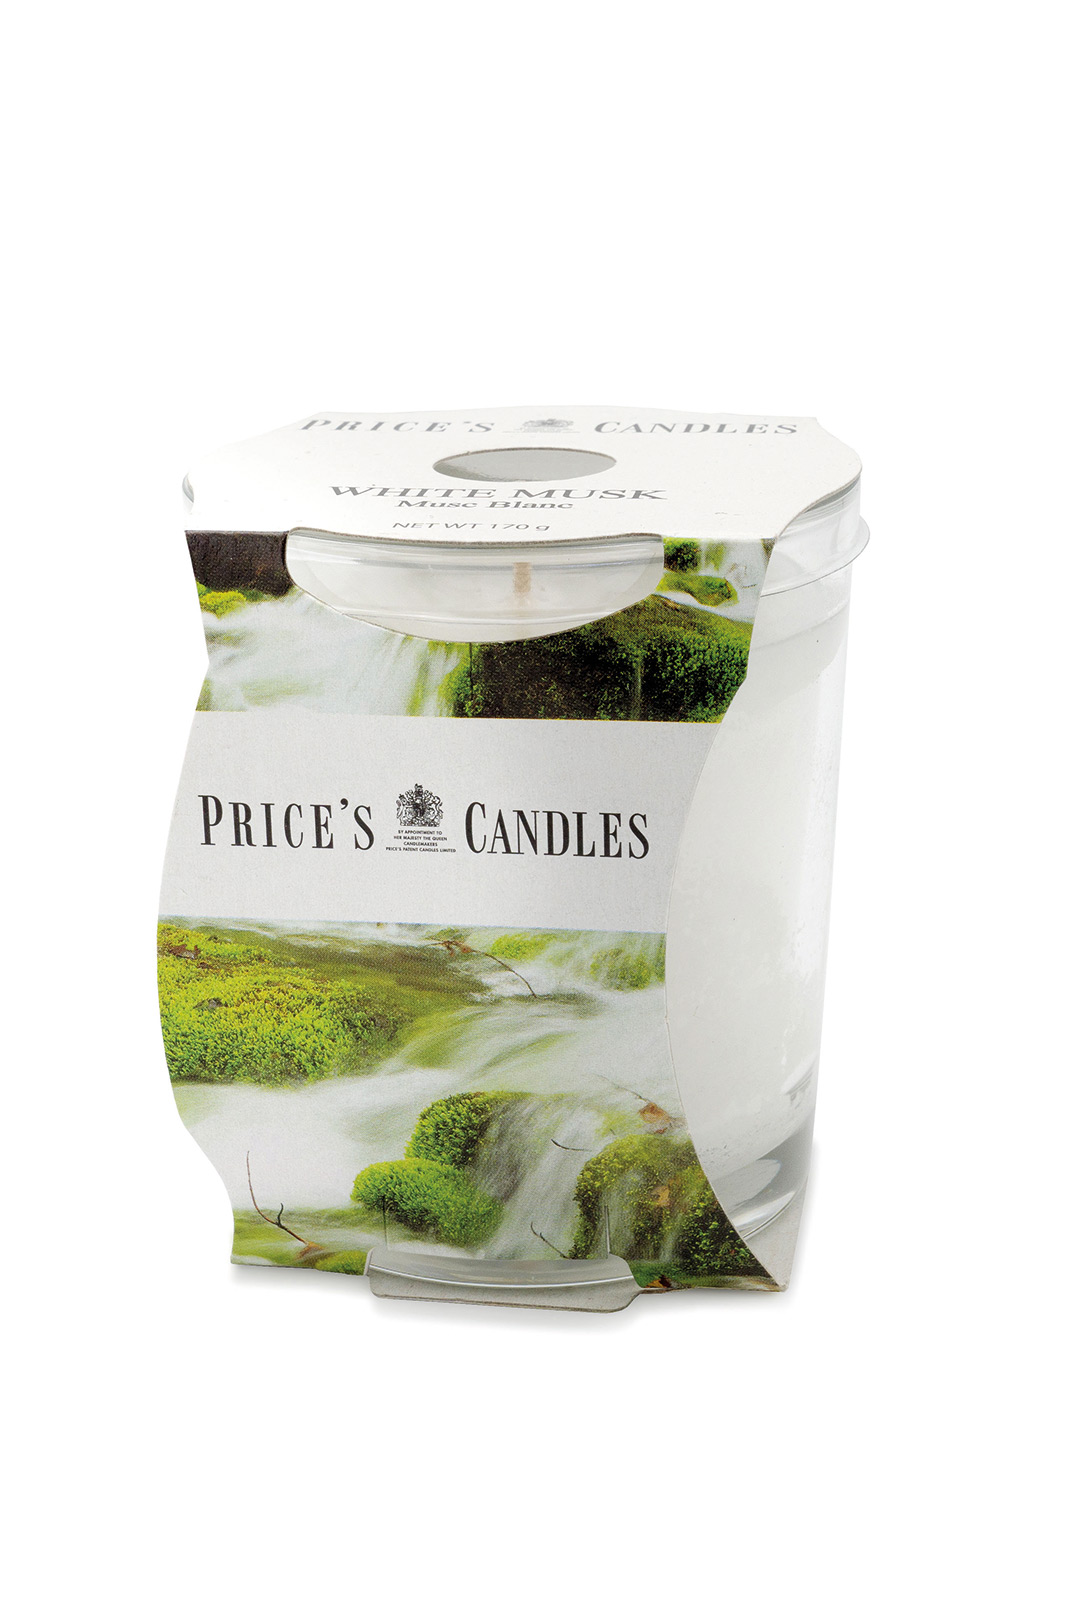 Prices Candle "White Musk" 170g       